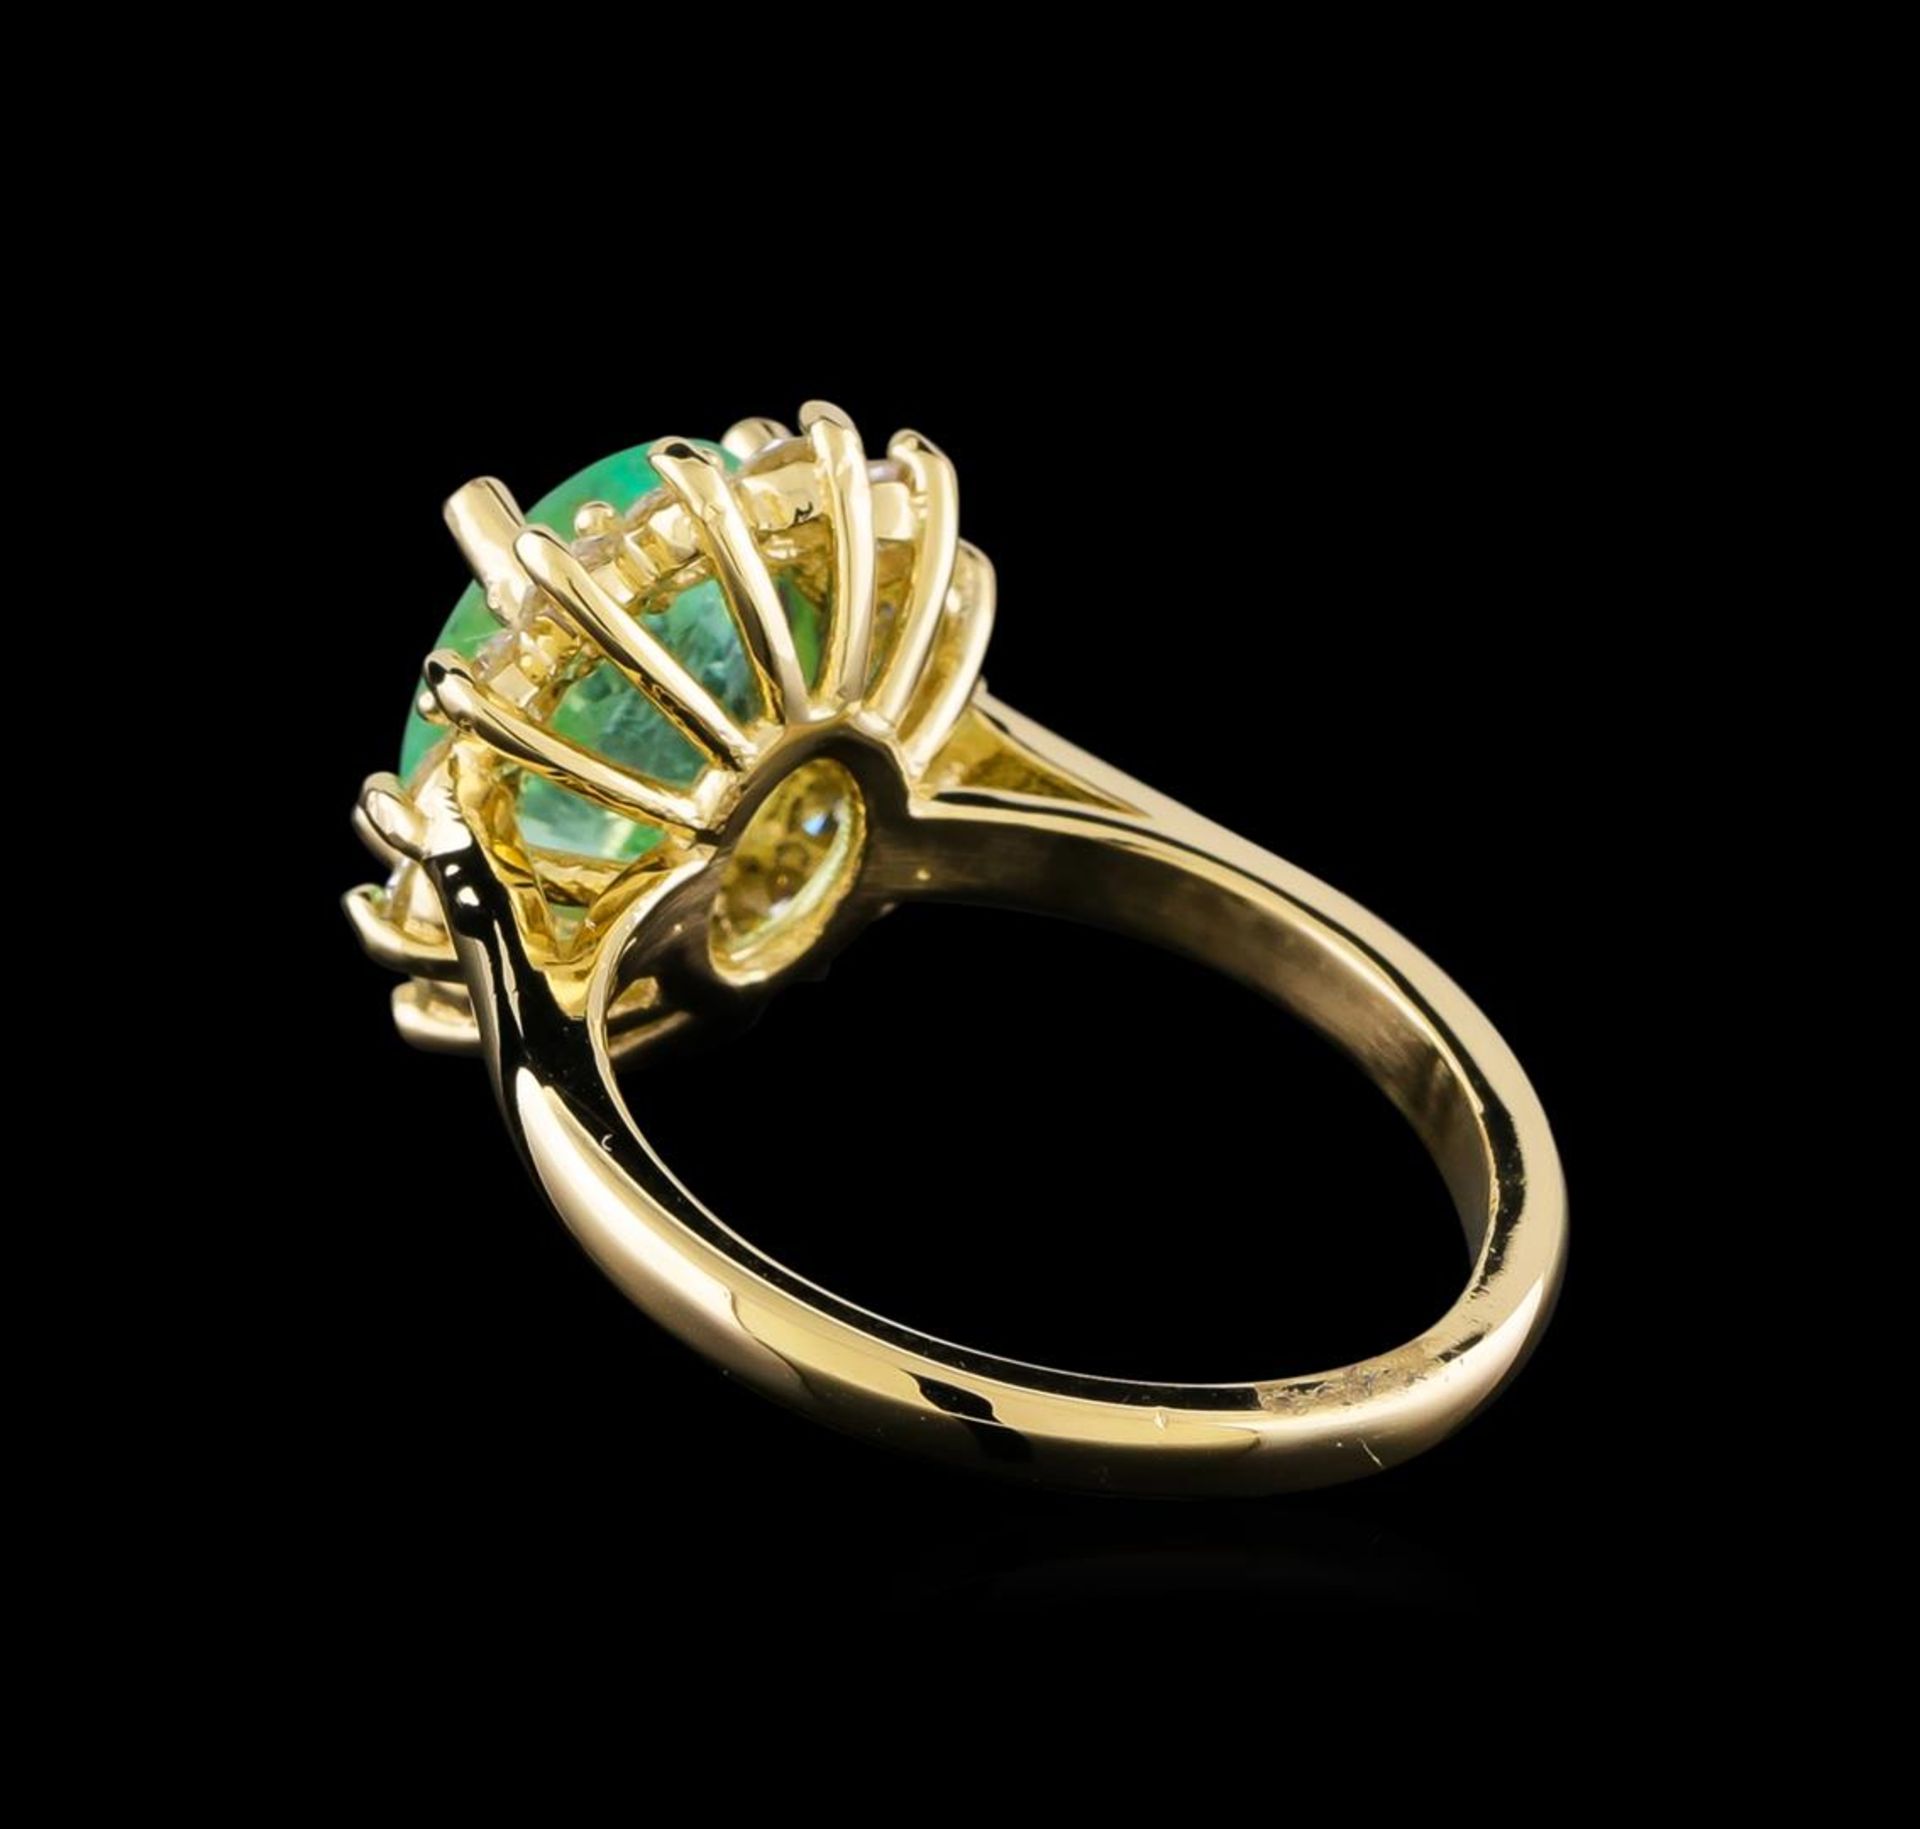 2.65 ctw Emerald and Diamond Ring - 14KT Yellow Gold - Image 3 of 5